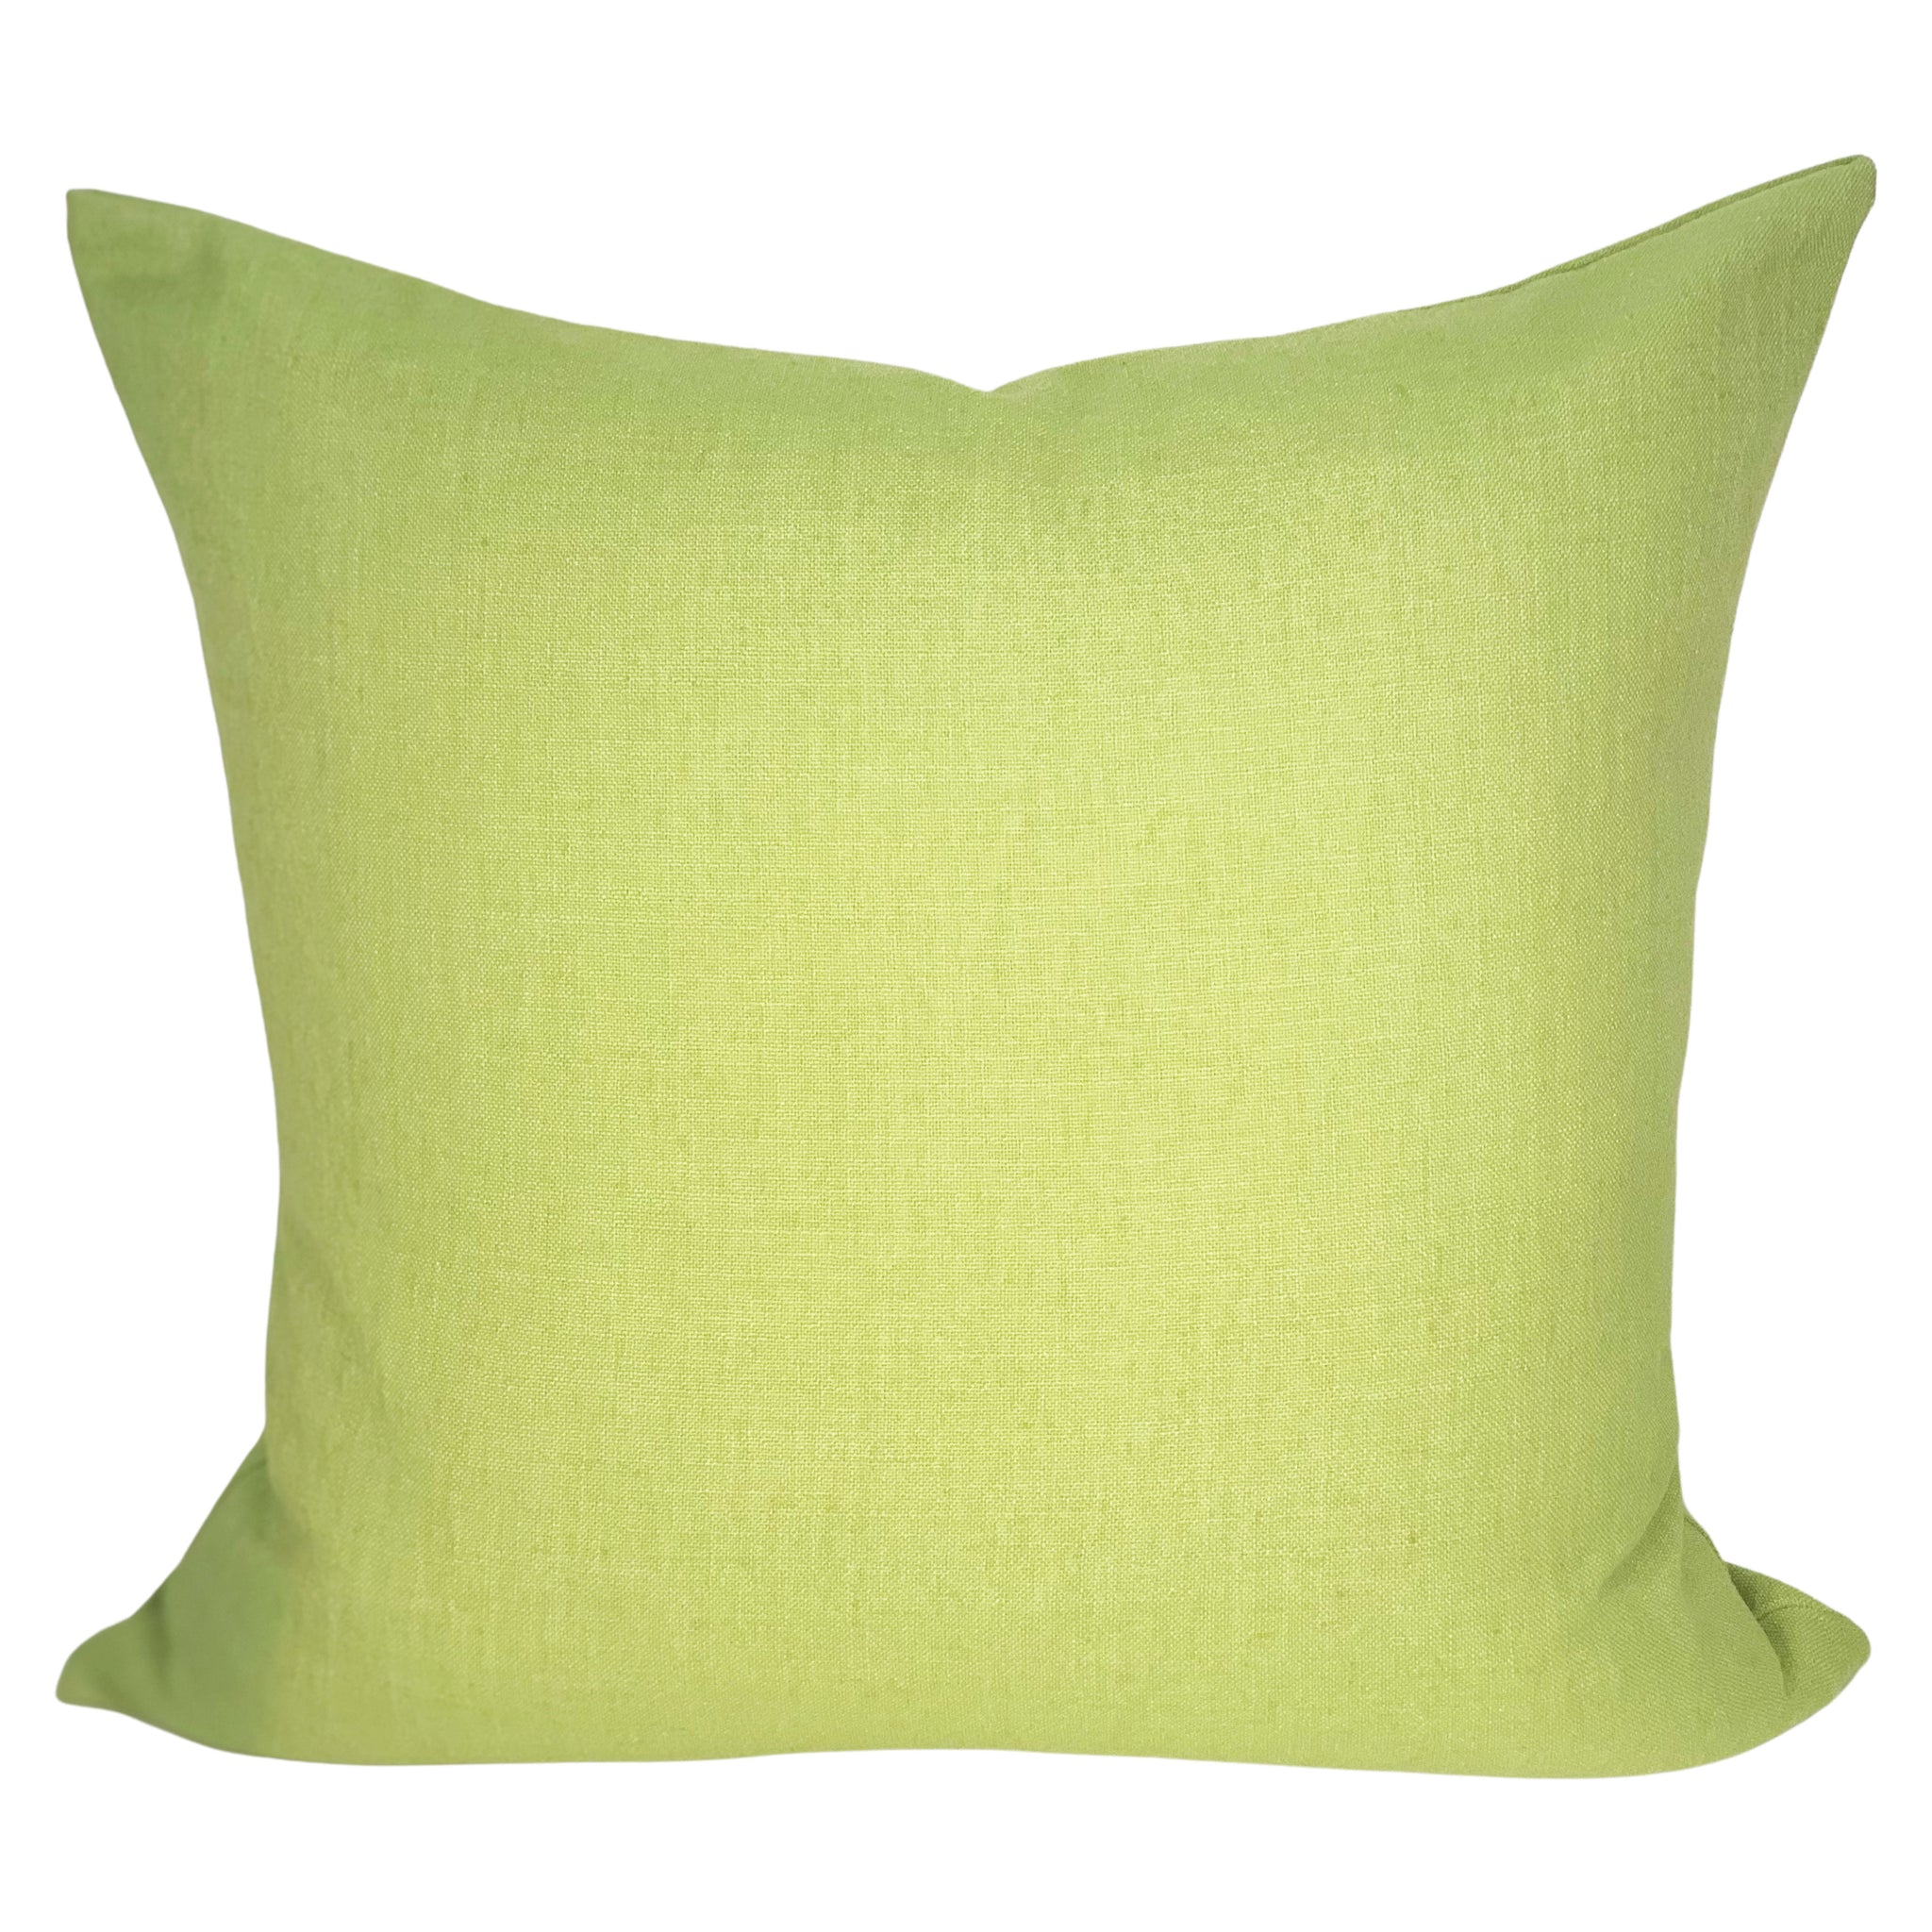 Cassis Pillow Cover in Vera